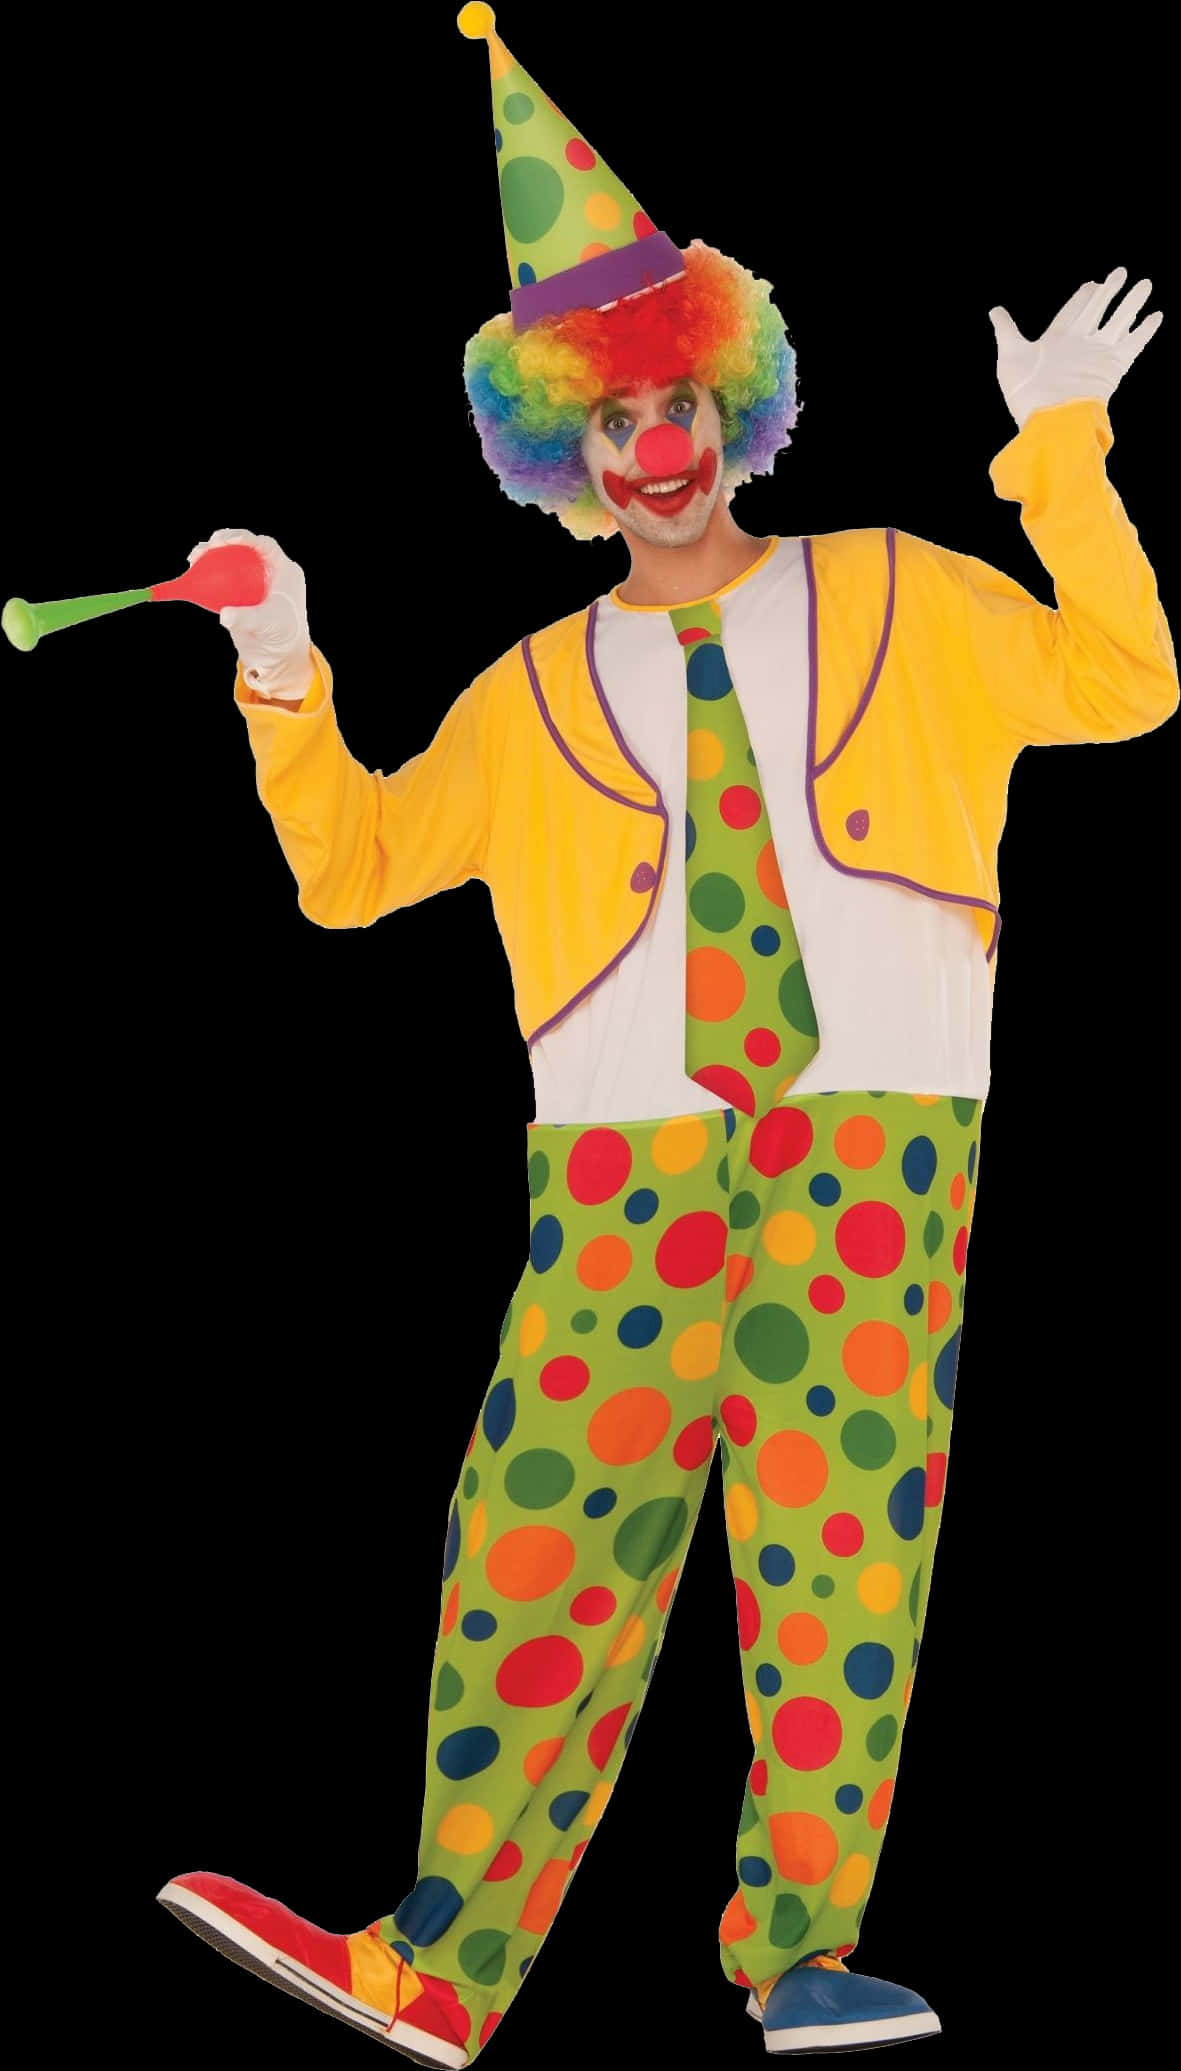 Colorful Clown Posing With Horn.jpg PNG